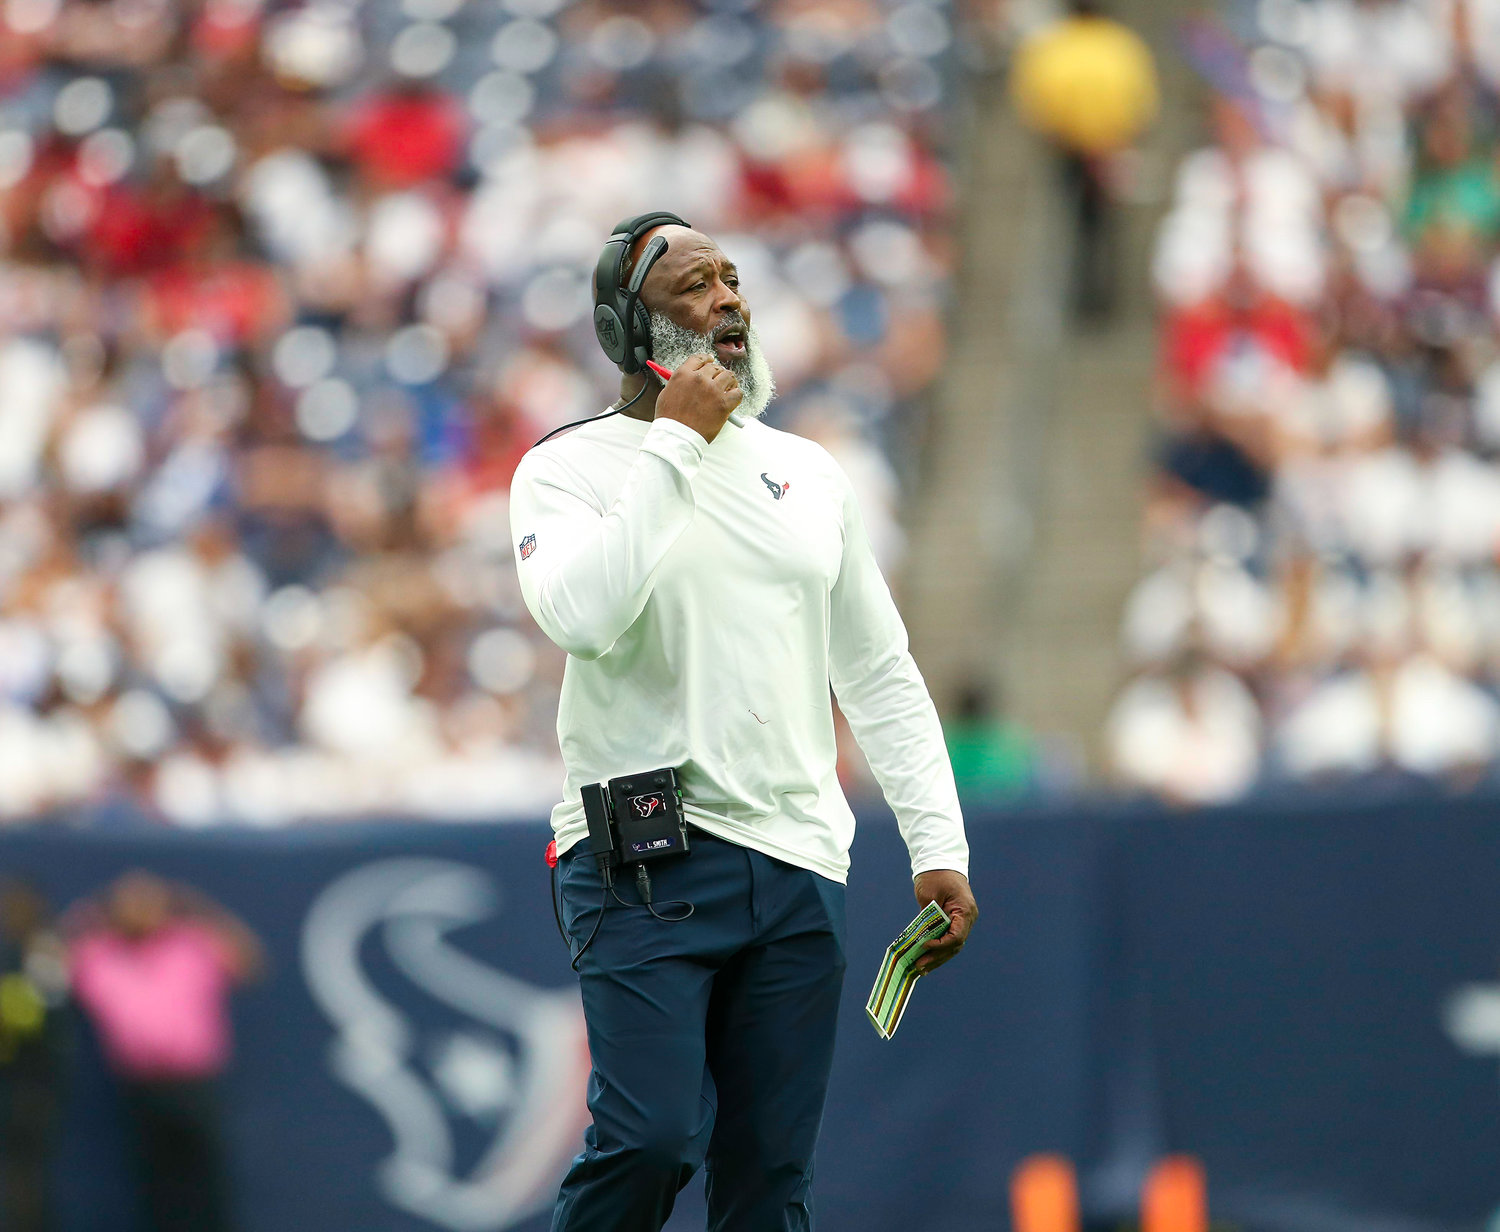 Houston Texans head coach Lovie Smith during an NFL game between the Texans and the Colts on September 11, 2022 in Houston. The game ended in a 20-20 tie after a scoreless overtime period.